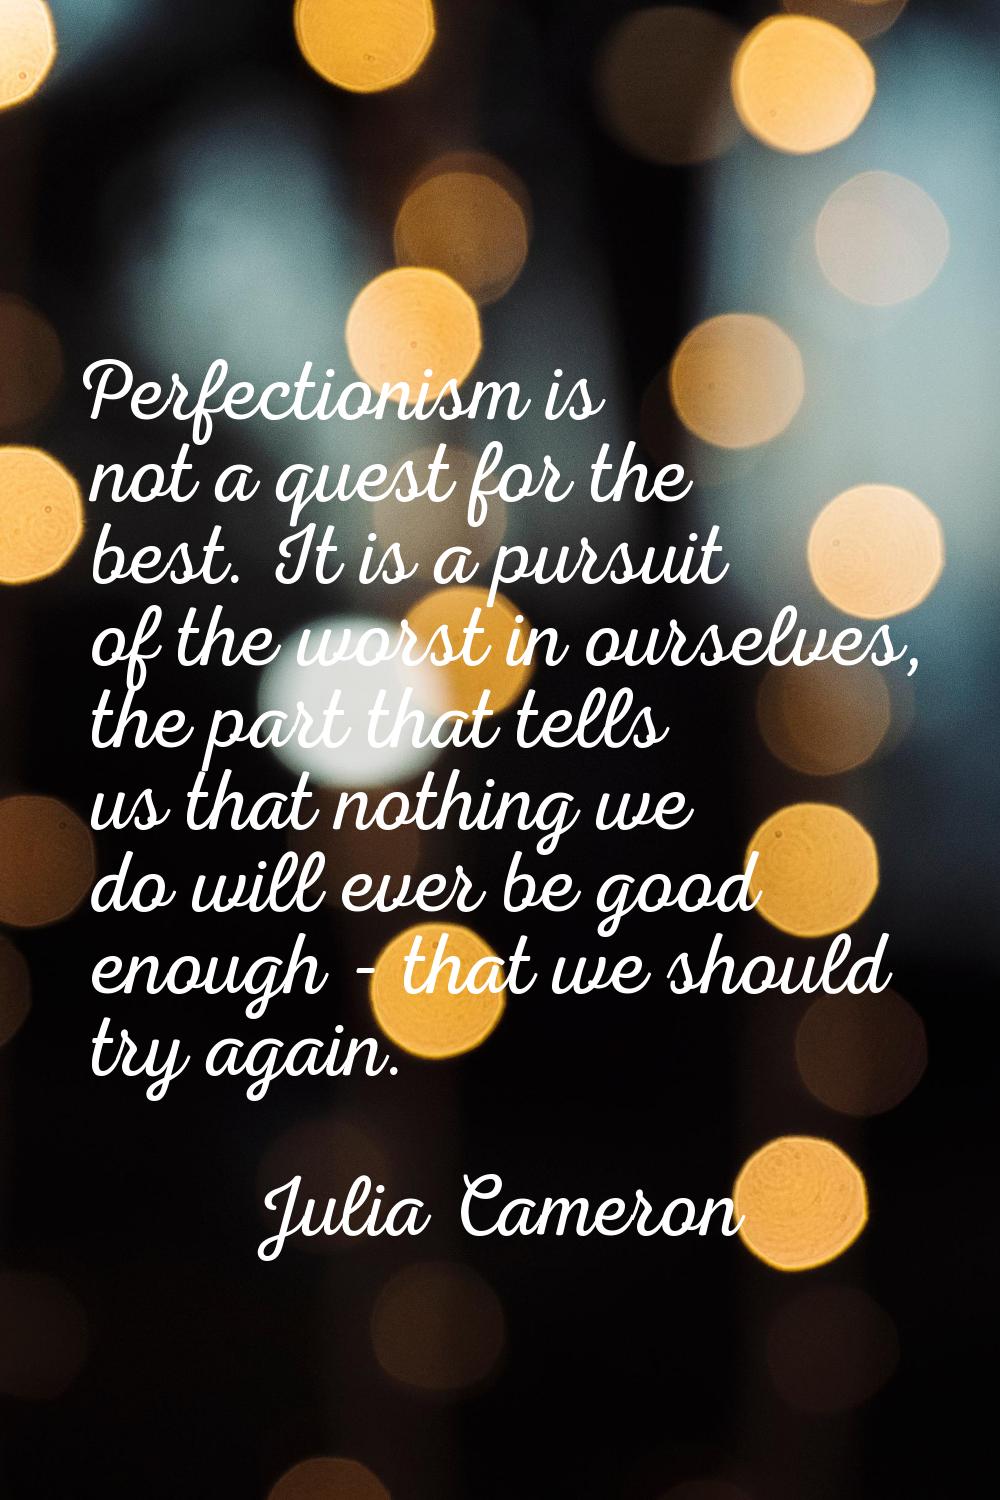 Perfectionism is not a quest for the best. It is a pursuit of the worst in ourselves, the part that